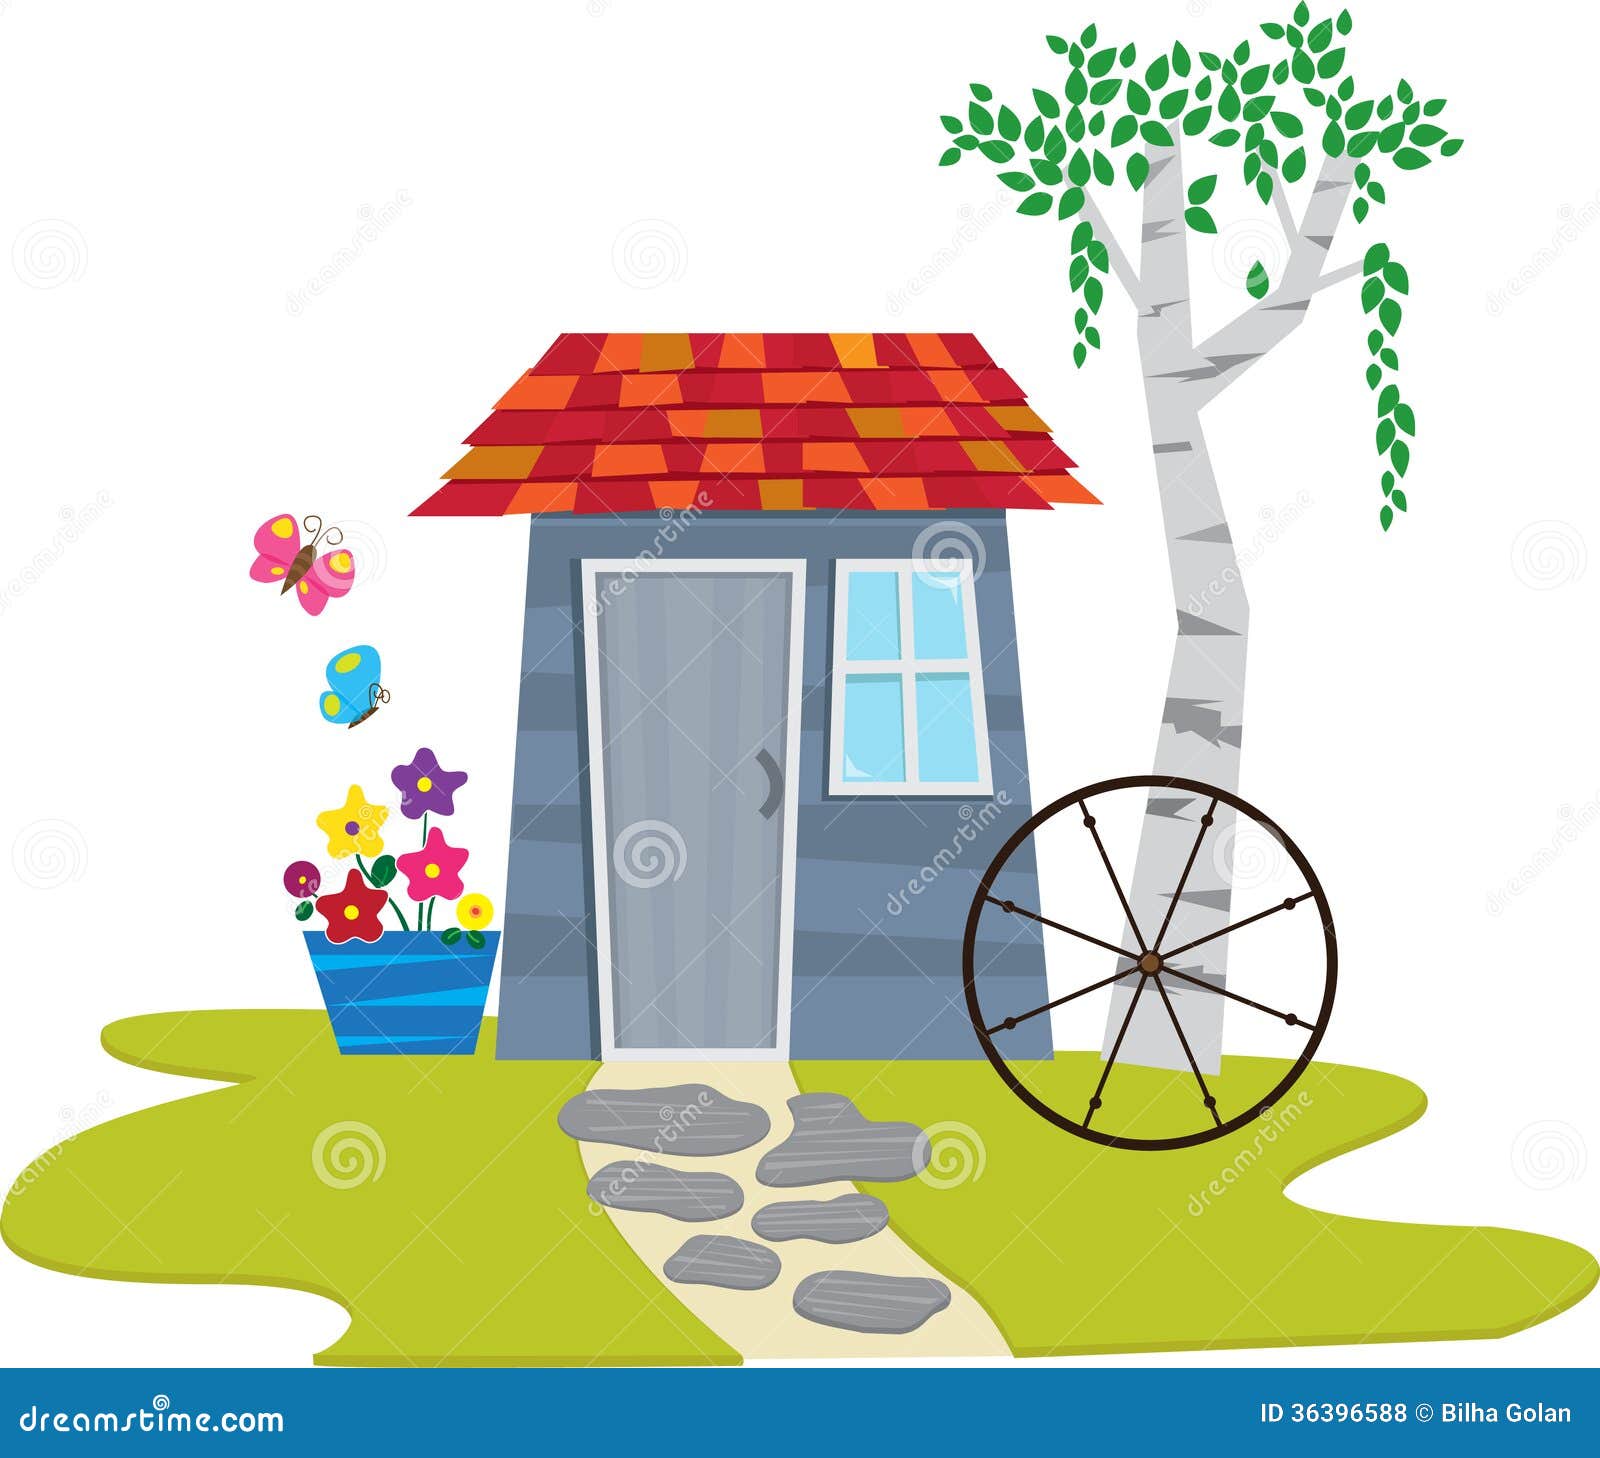 Shed Cartoons, Illustrations &amp; Vector Stock Images - 5077 